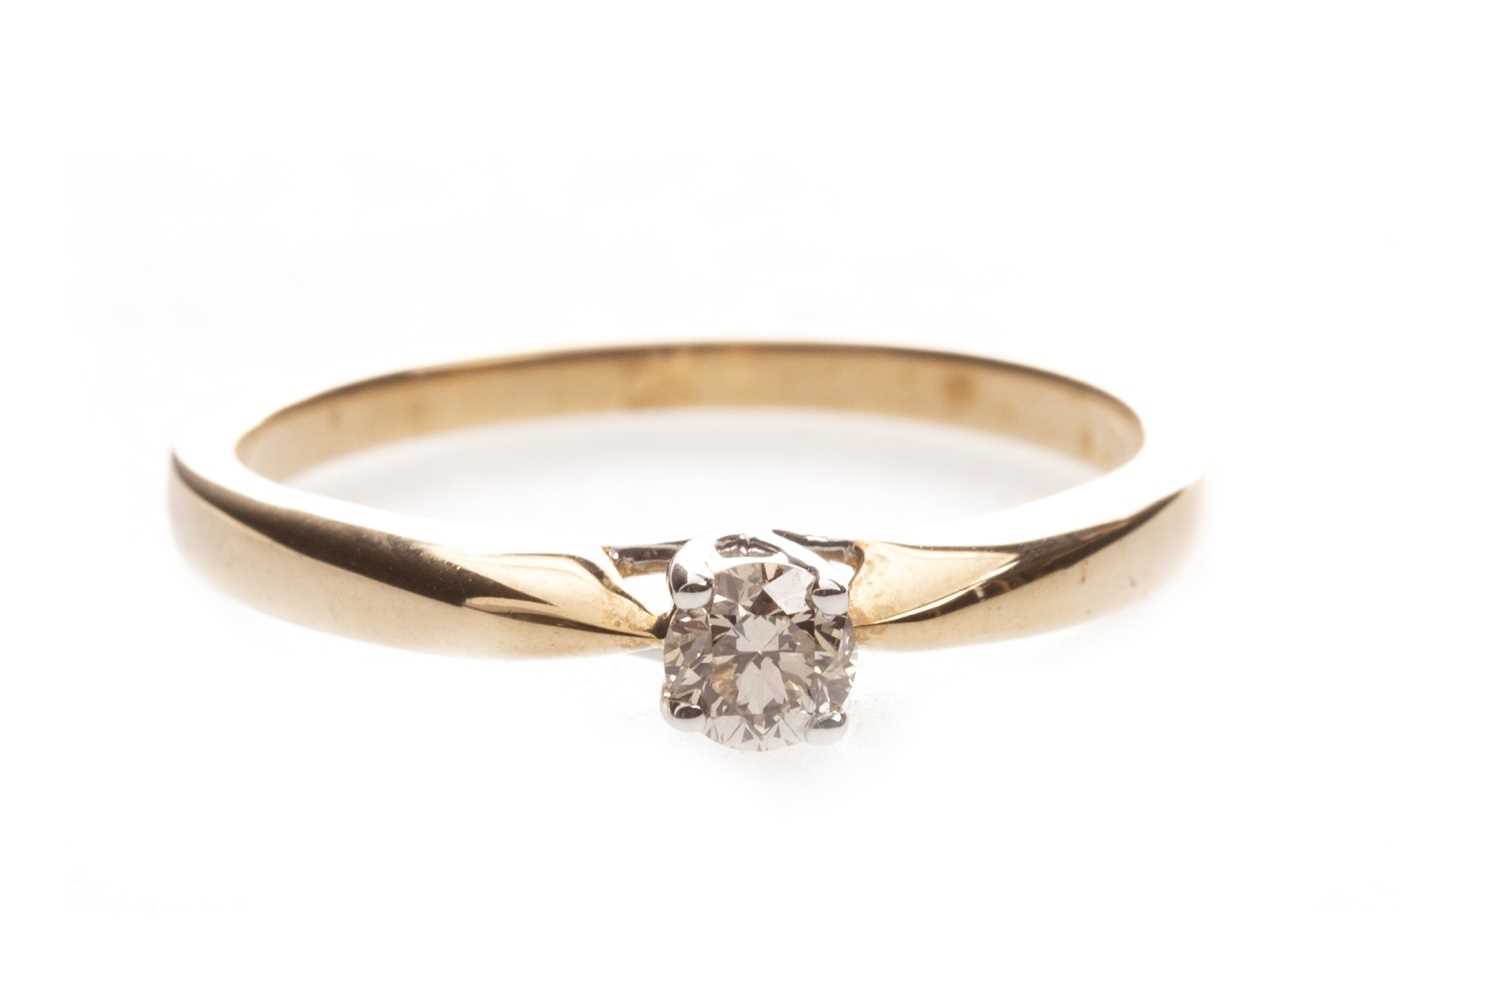 Lot 350 - A DIAMOND SOLITAIRE RING